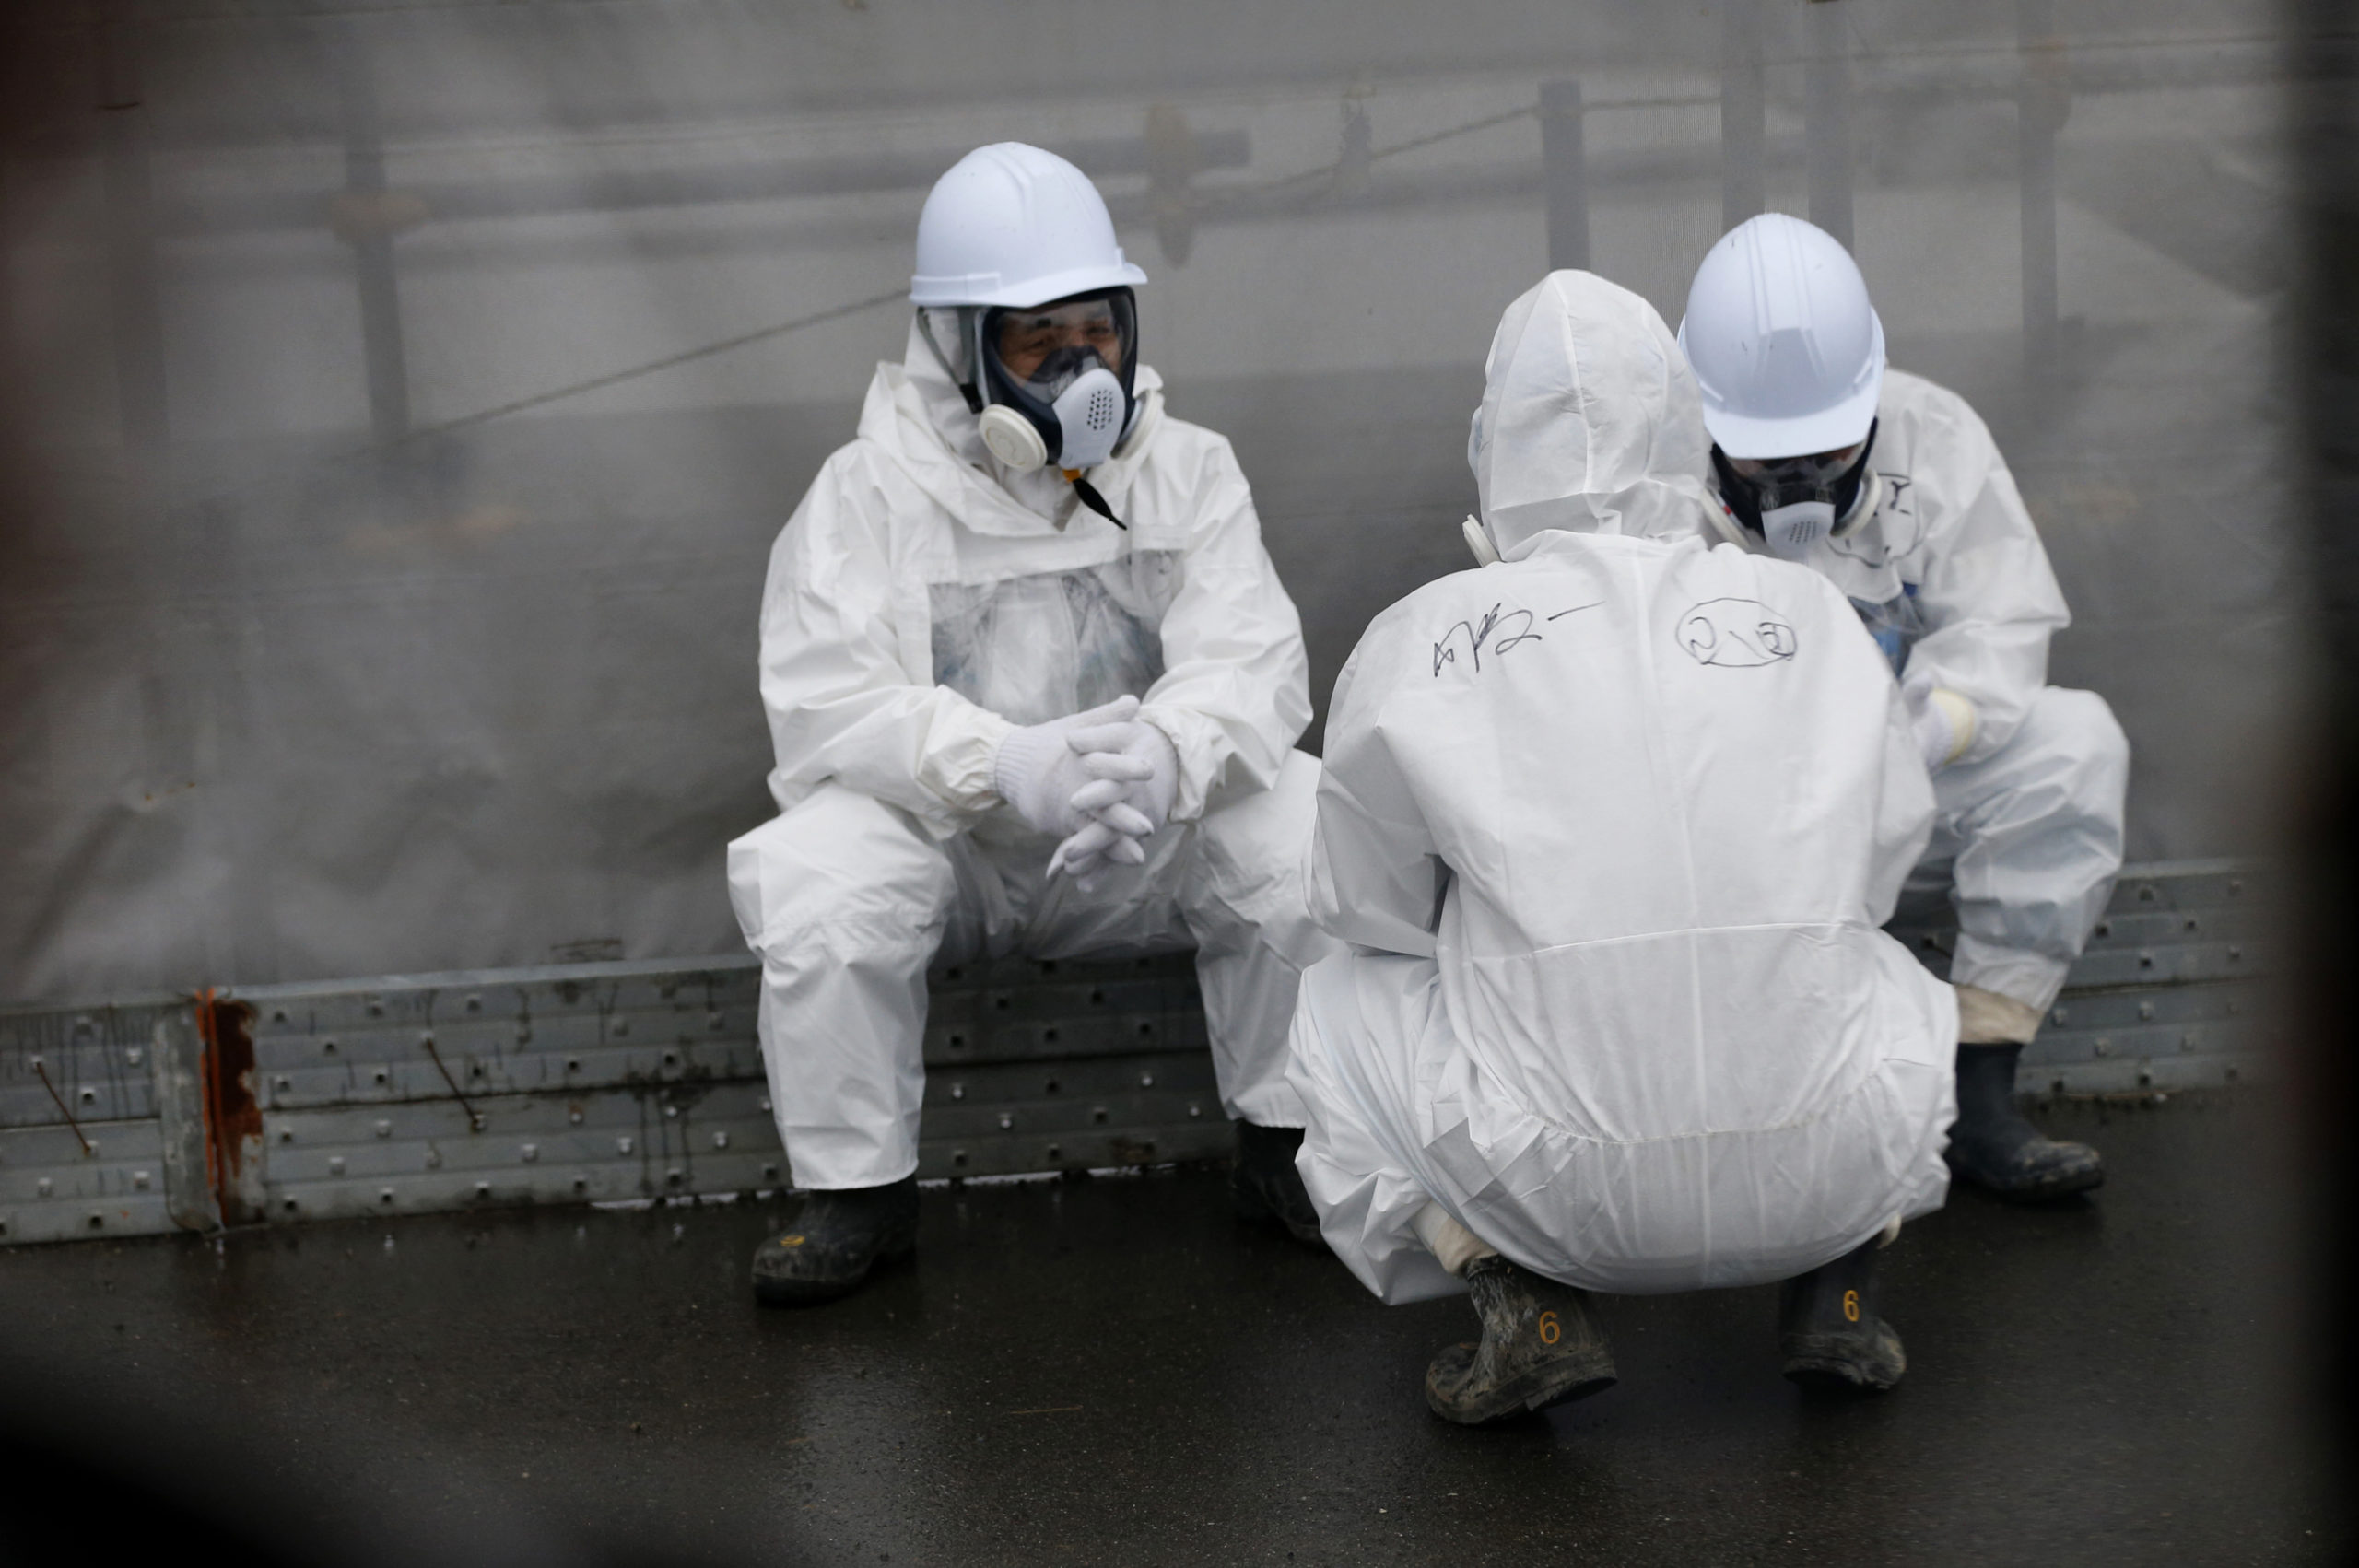 The Latest Fukushima Leak Was Unreported For Almost A Year